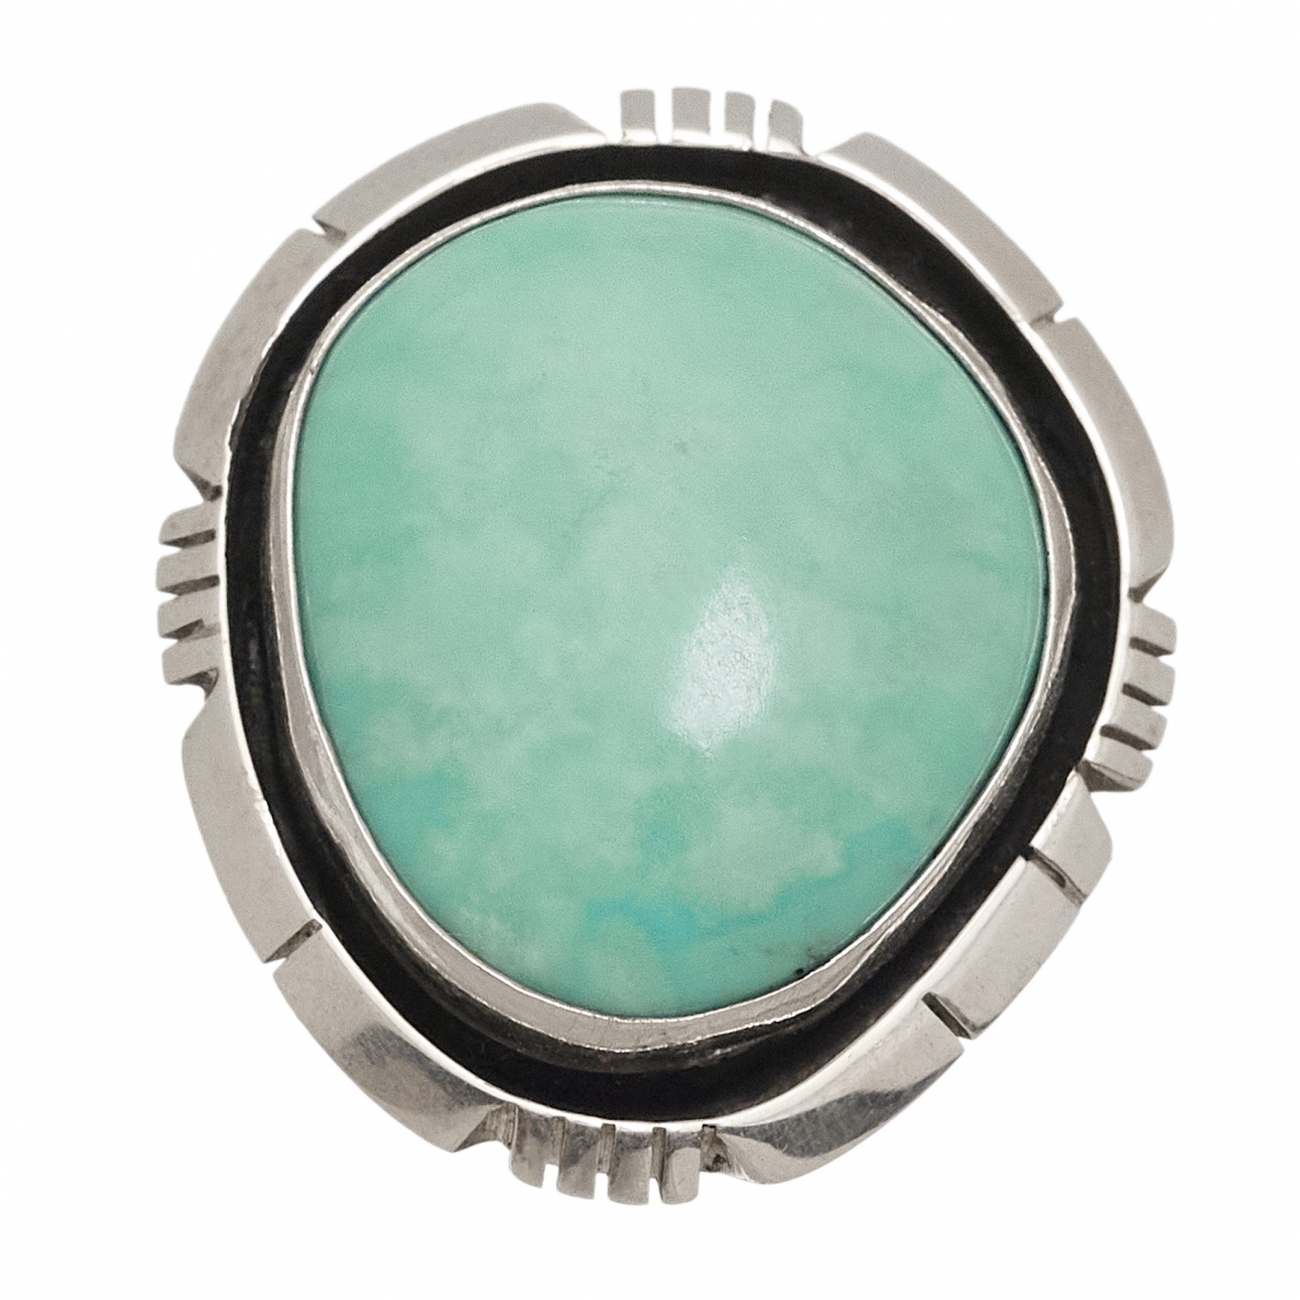 Navajo ring for men BA1230 in turquoise and silver - Harpo Paris